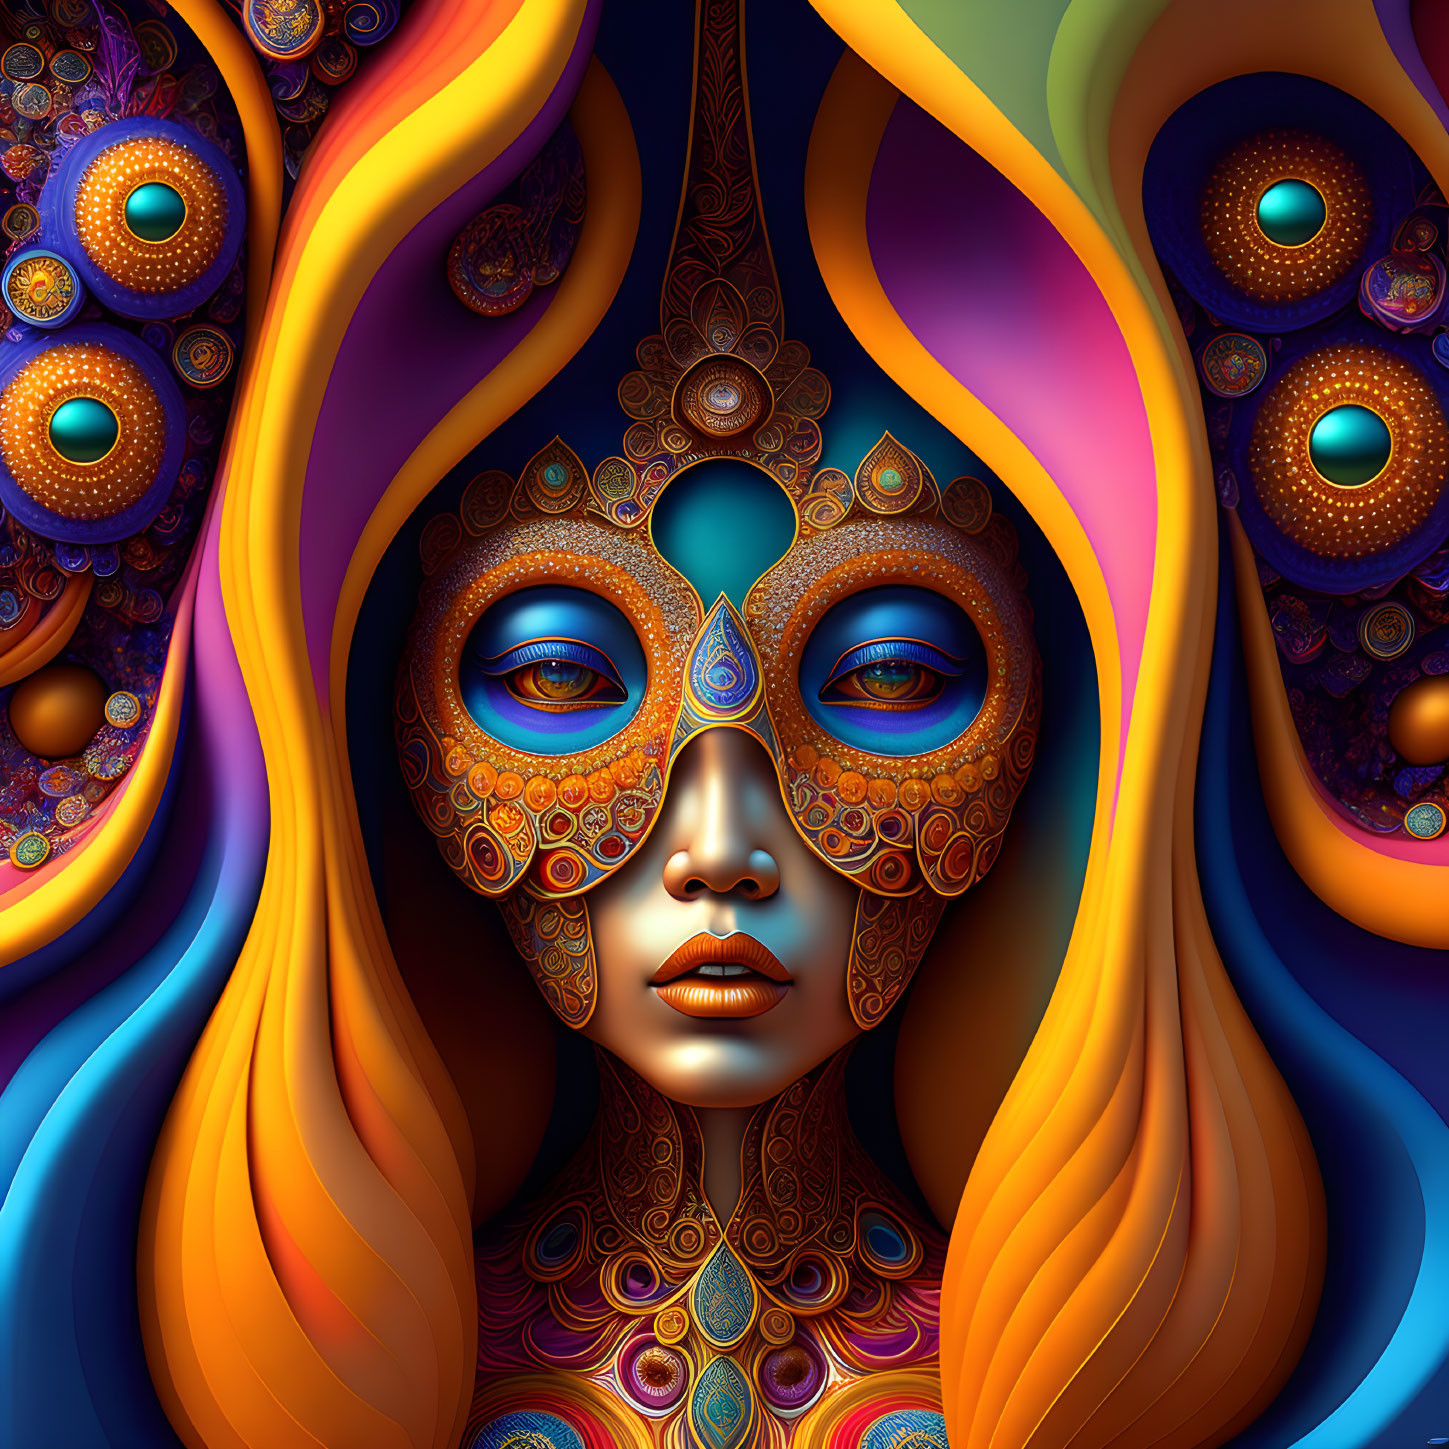 Colorful Surreal Face Artwork with Peacock Feather Patterns